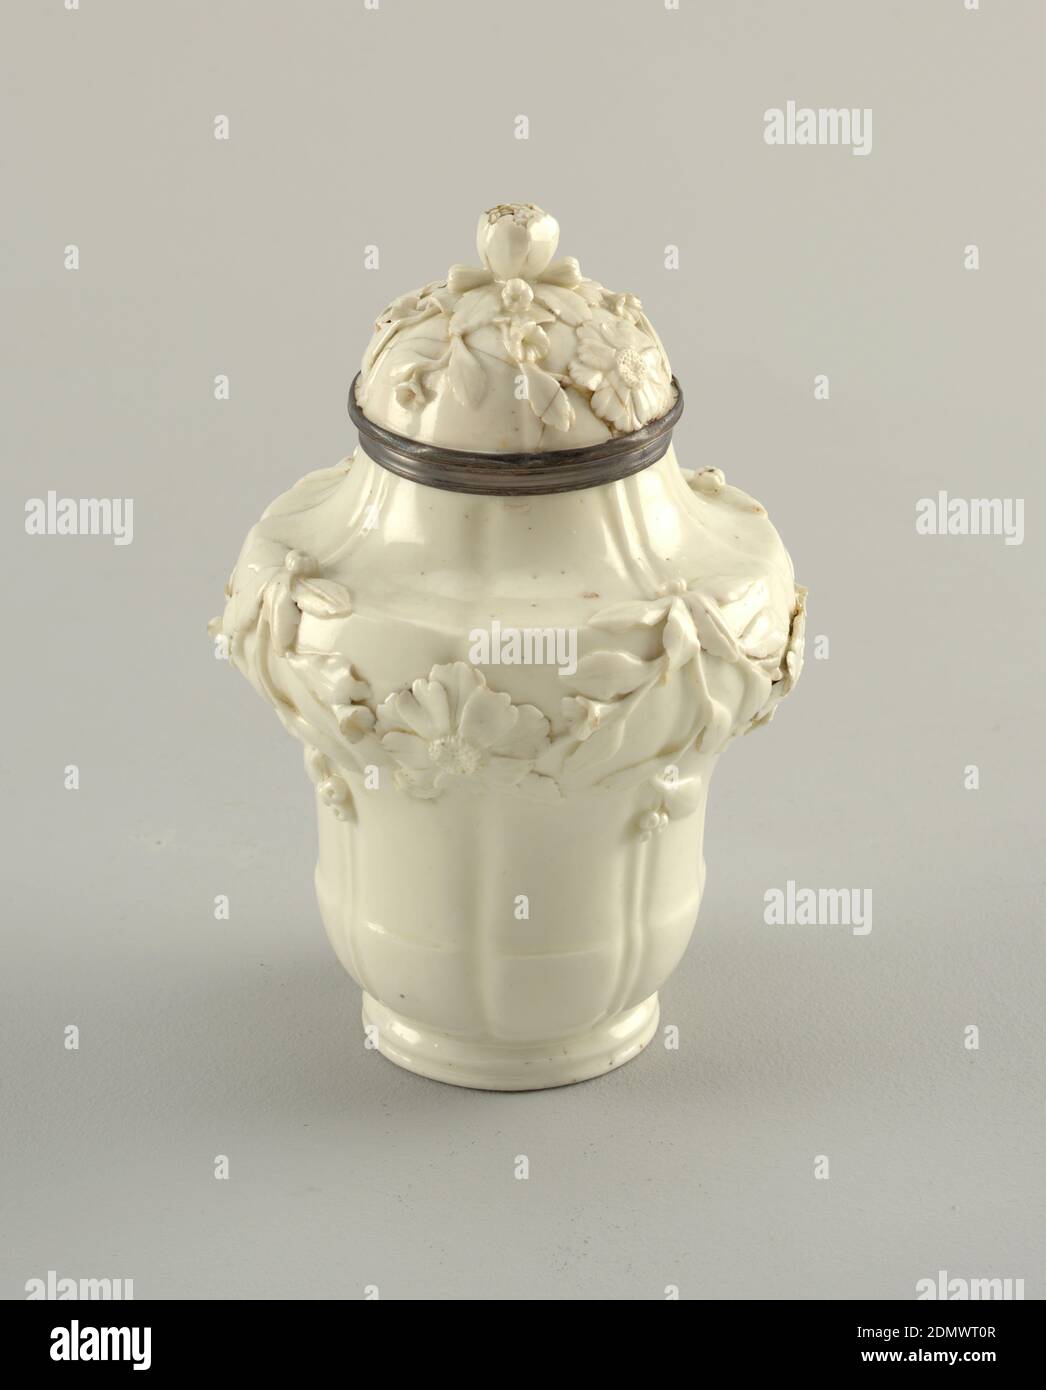 Covered Jars, Mennecy Porcelain Manufactory, French, active 1735 – 1773, soft paste porcelain, vitreous enamel, Inverted acorn shaped with cavetto neck and domed cover with floral knob. Cylindrical foot; side broken by four vertical grooves alternating with four ridges. Floral festoons in relief on shoulders, flowers in relief upon covers, which have silver rims., France, 1740–1750, ceramics, Decorative Arts, jars, jars Stock Photo